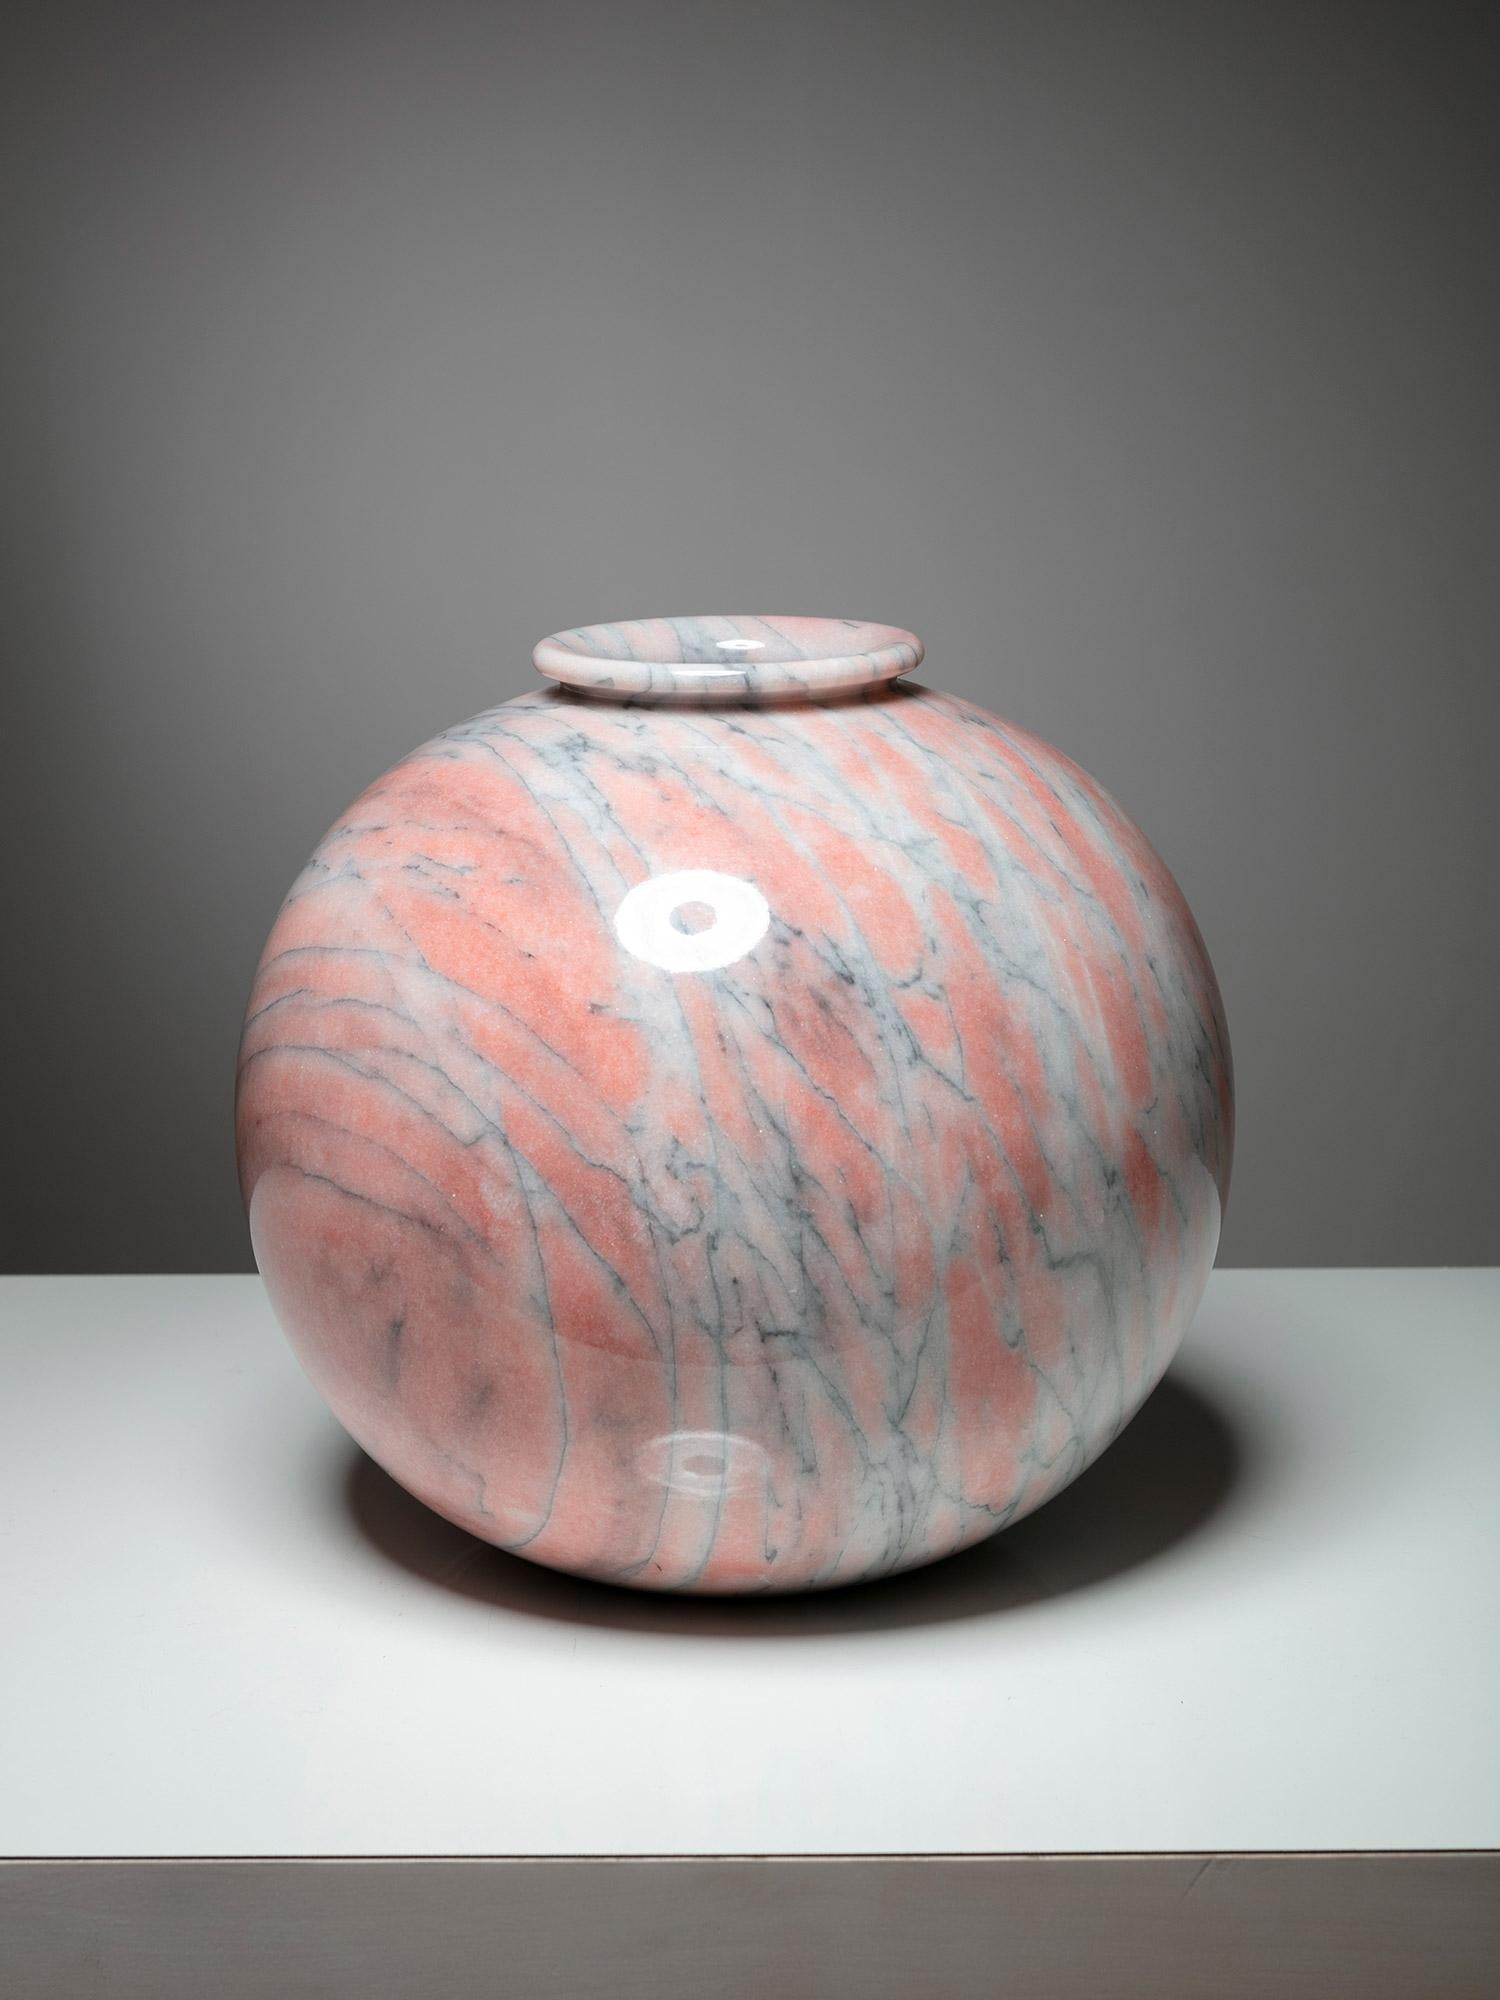 Large 70s marble vase.
Soft pink white and blue shades.
Also available a similar model made out of onyx.